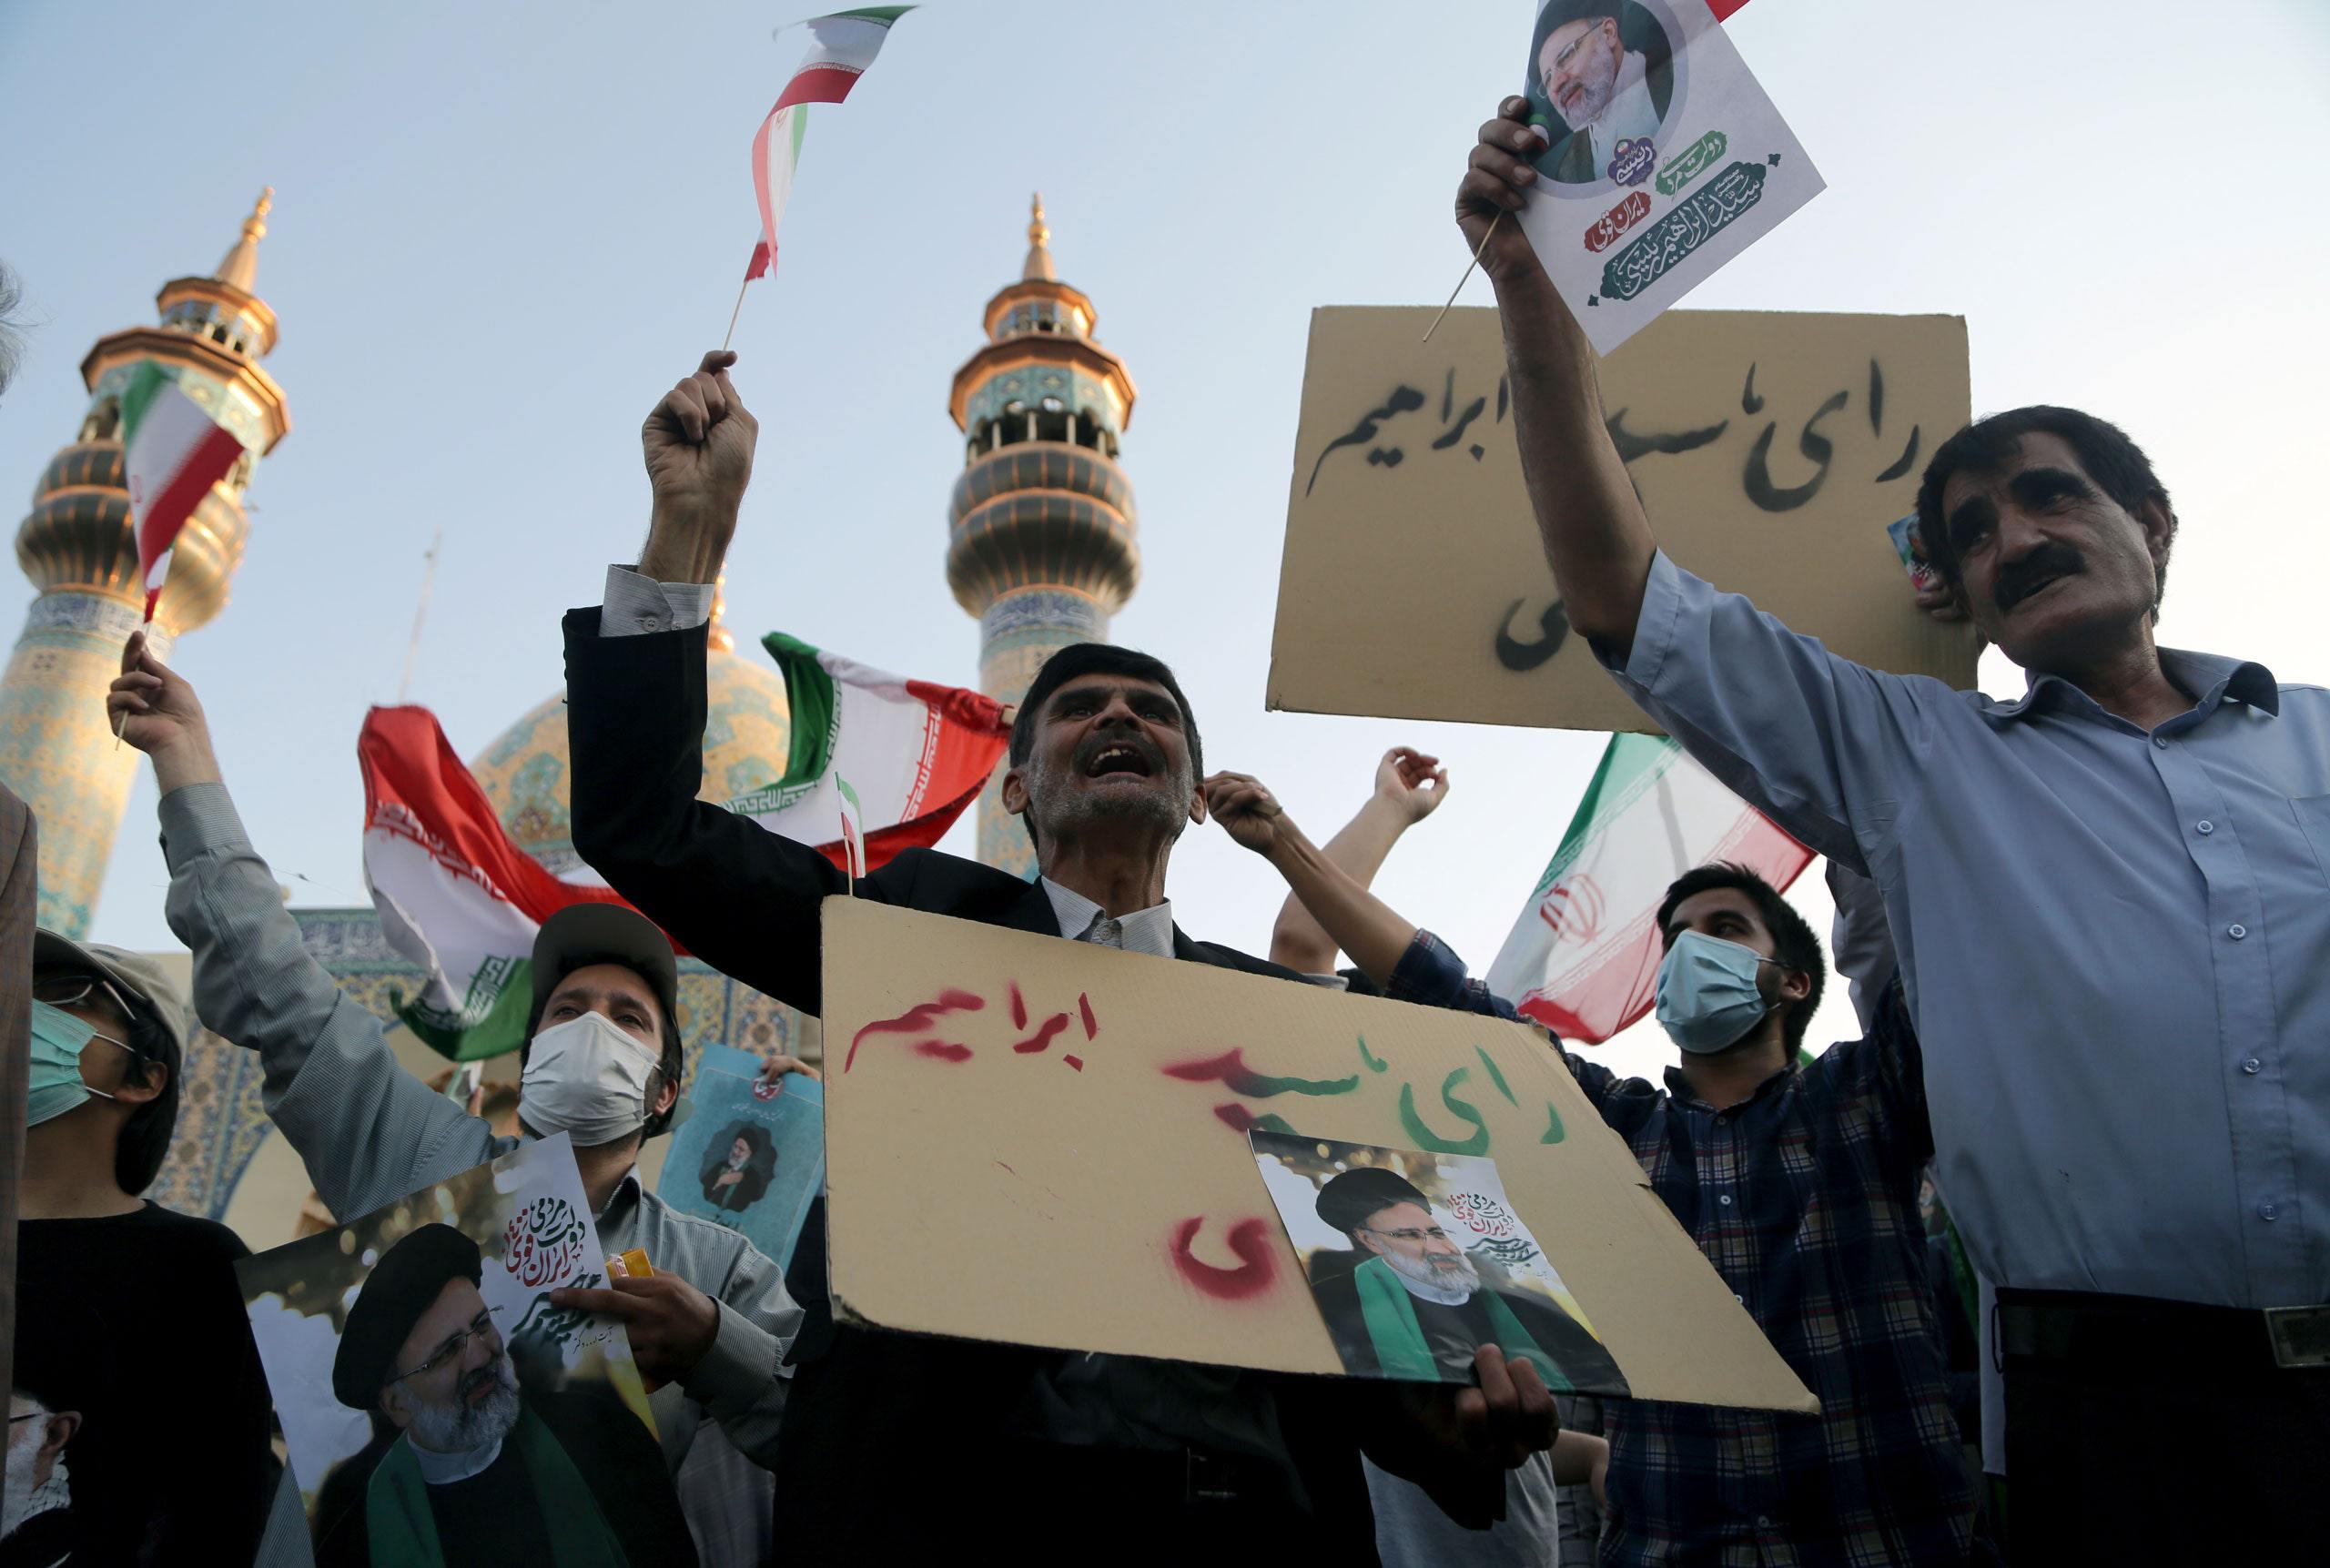 ifmat - Iran moves toward a one-party state